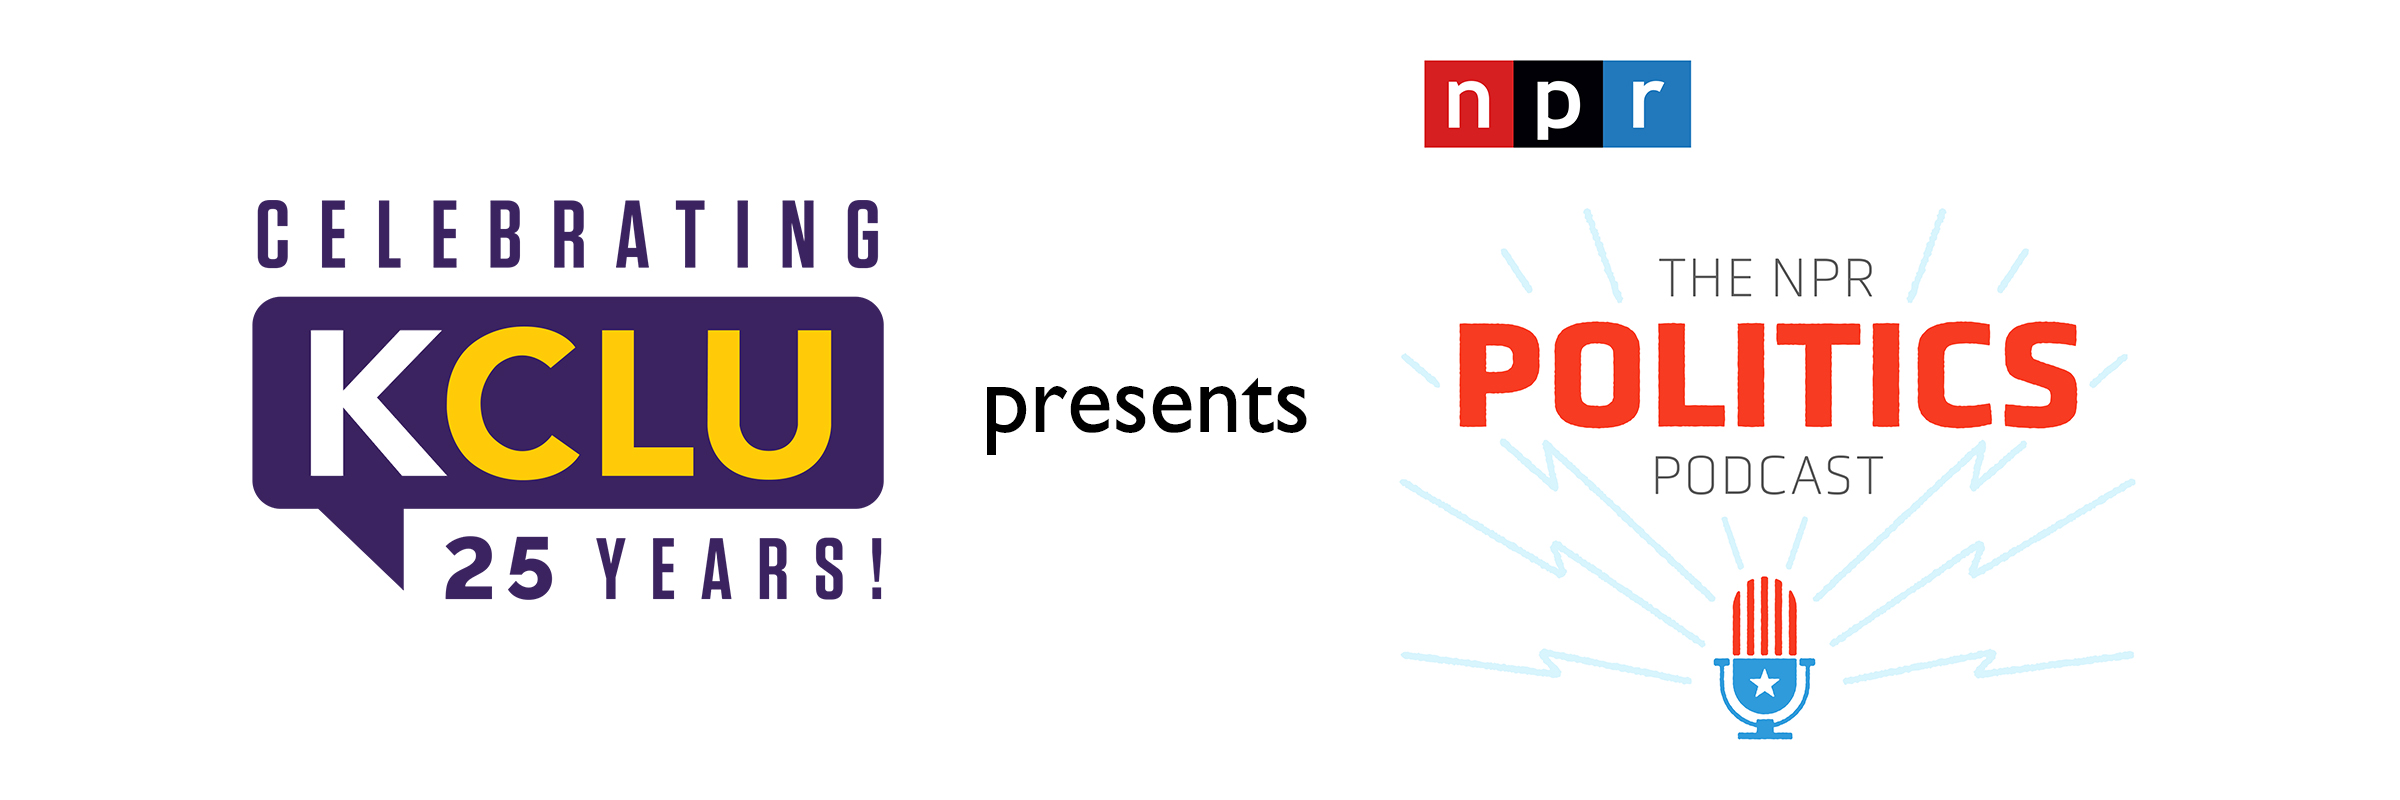 The NPR Politics Podcast Live: The Road to 2020